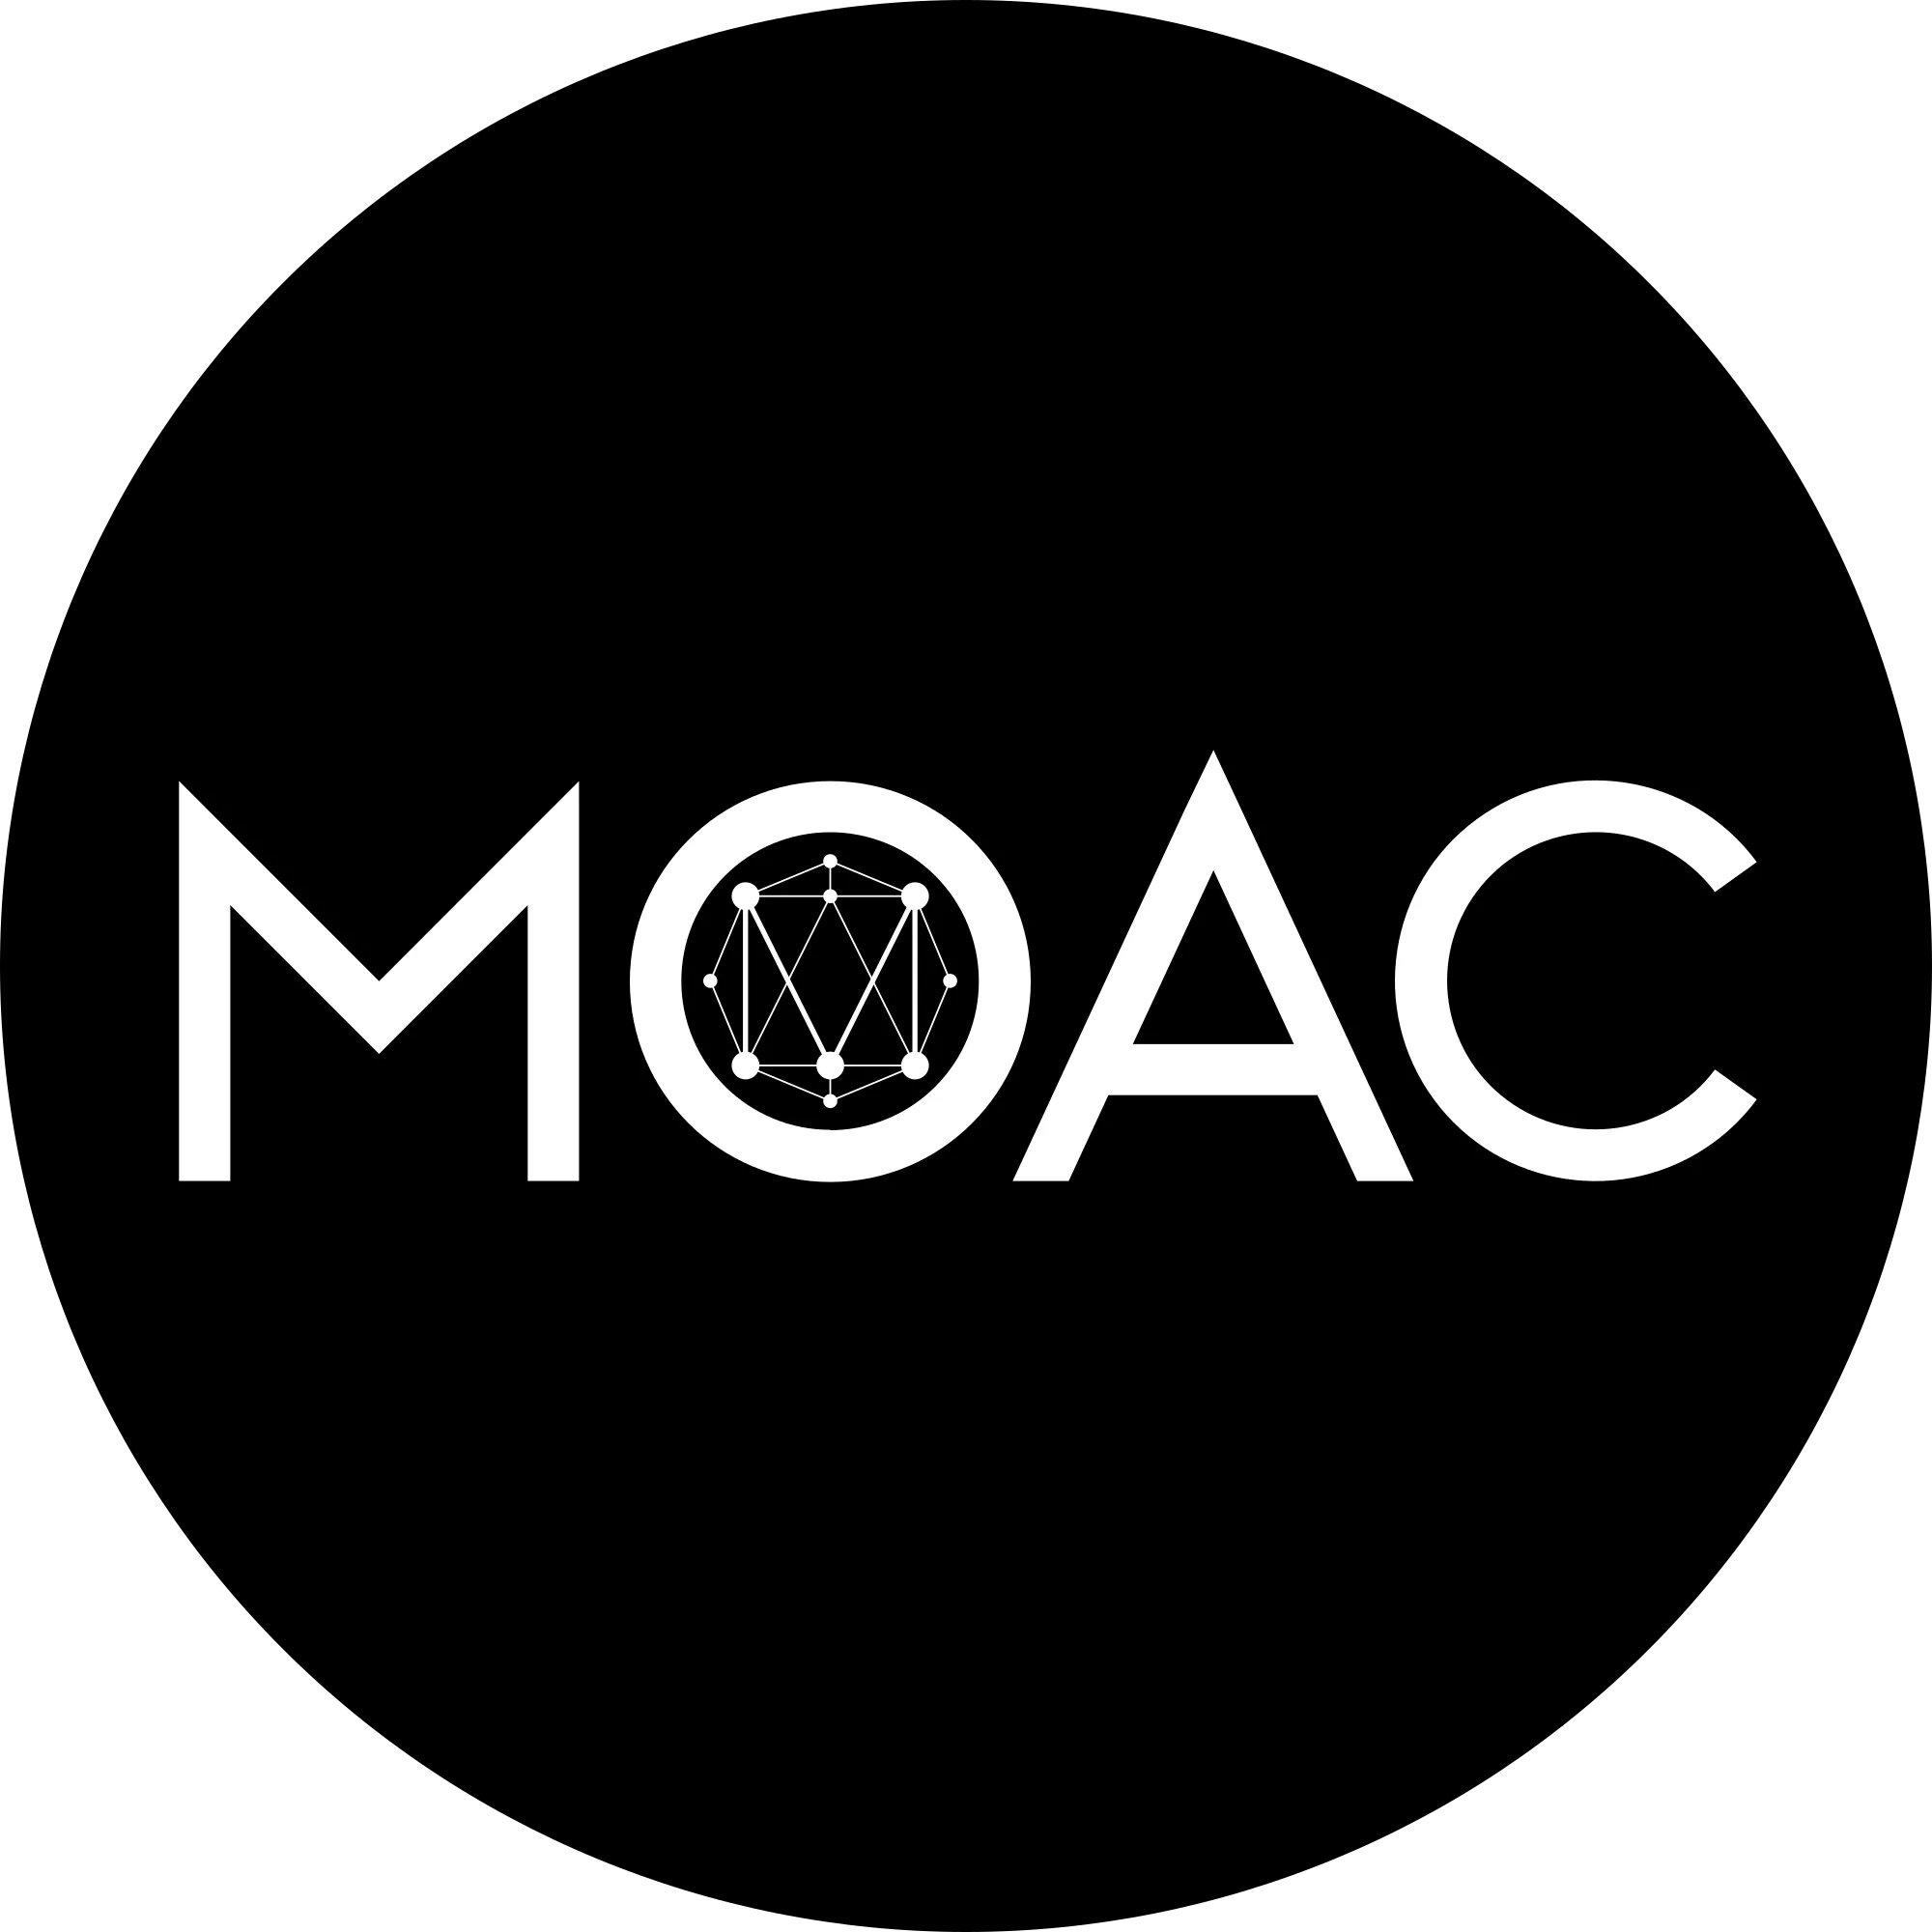 MOAC logo in png format